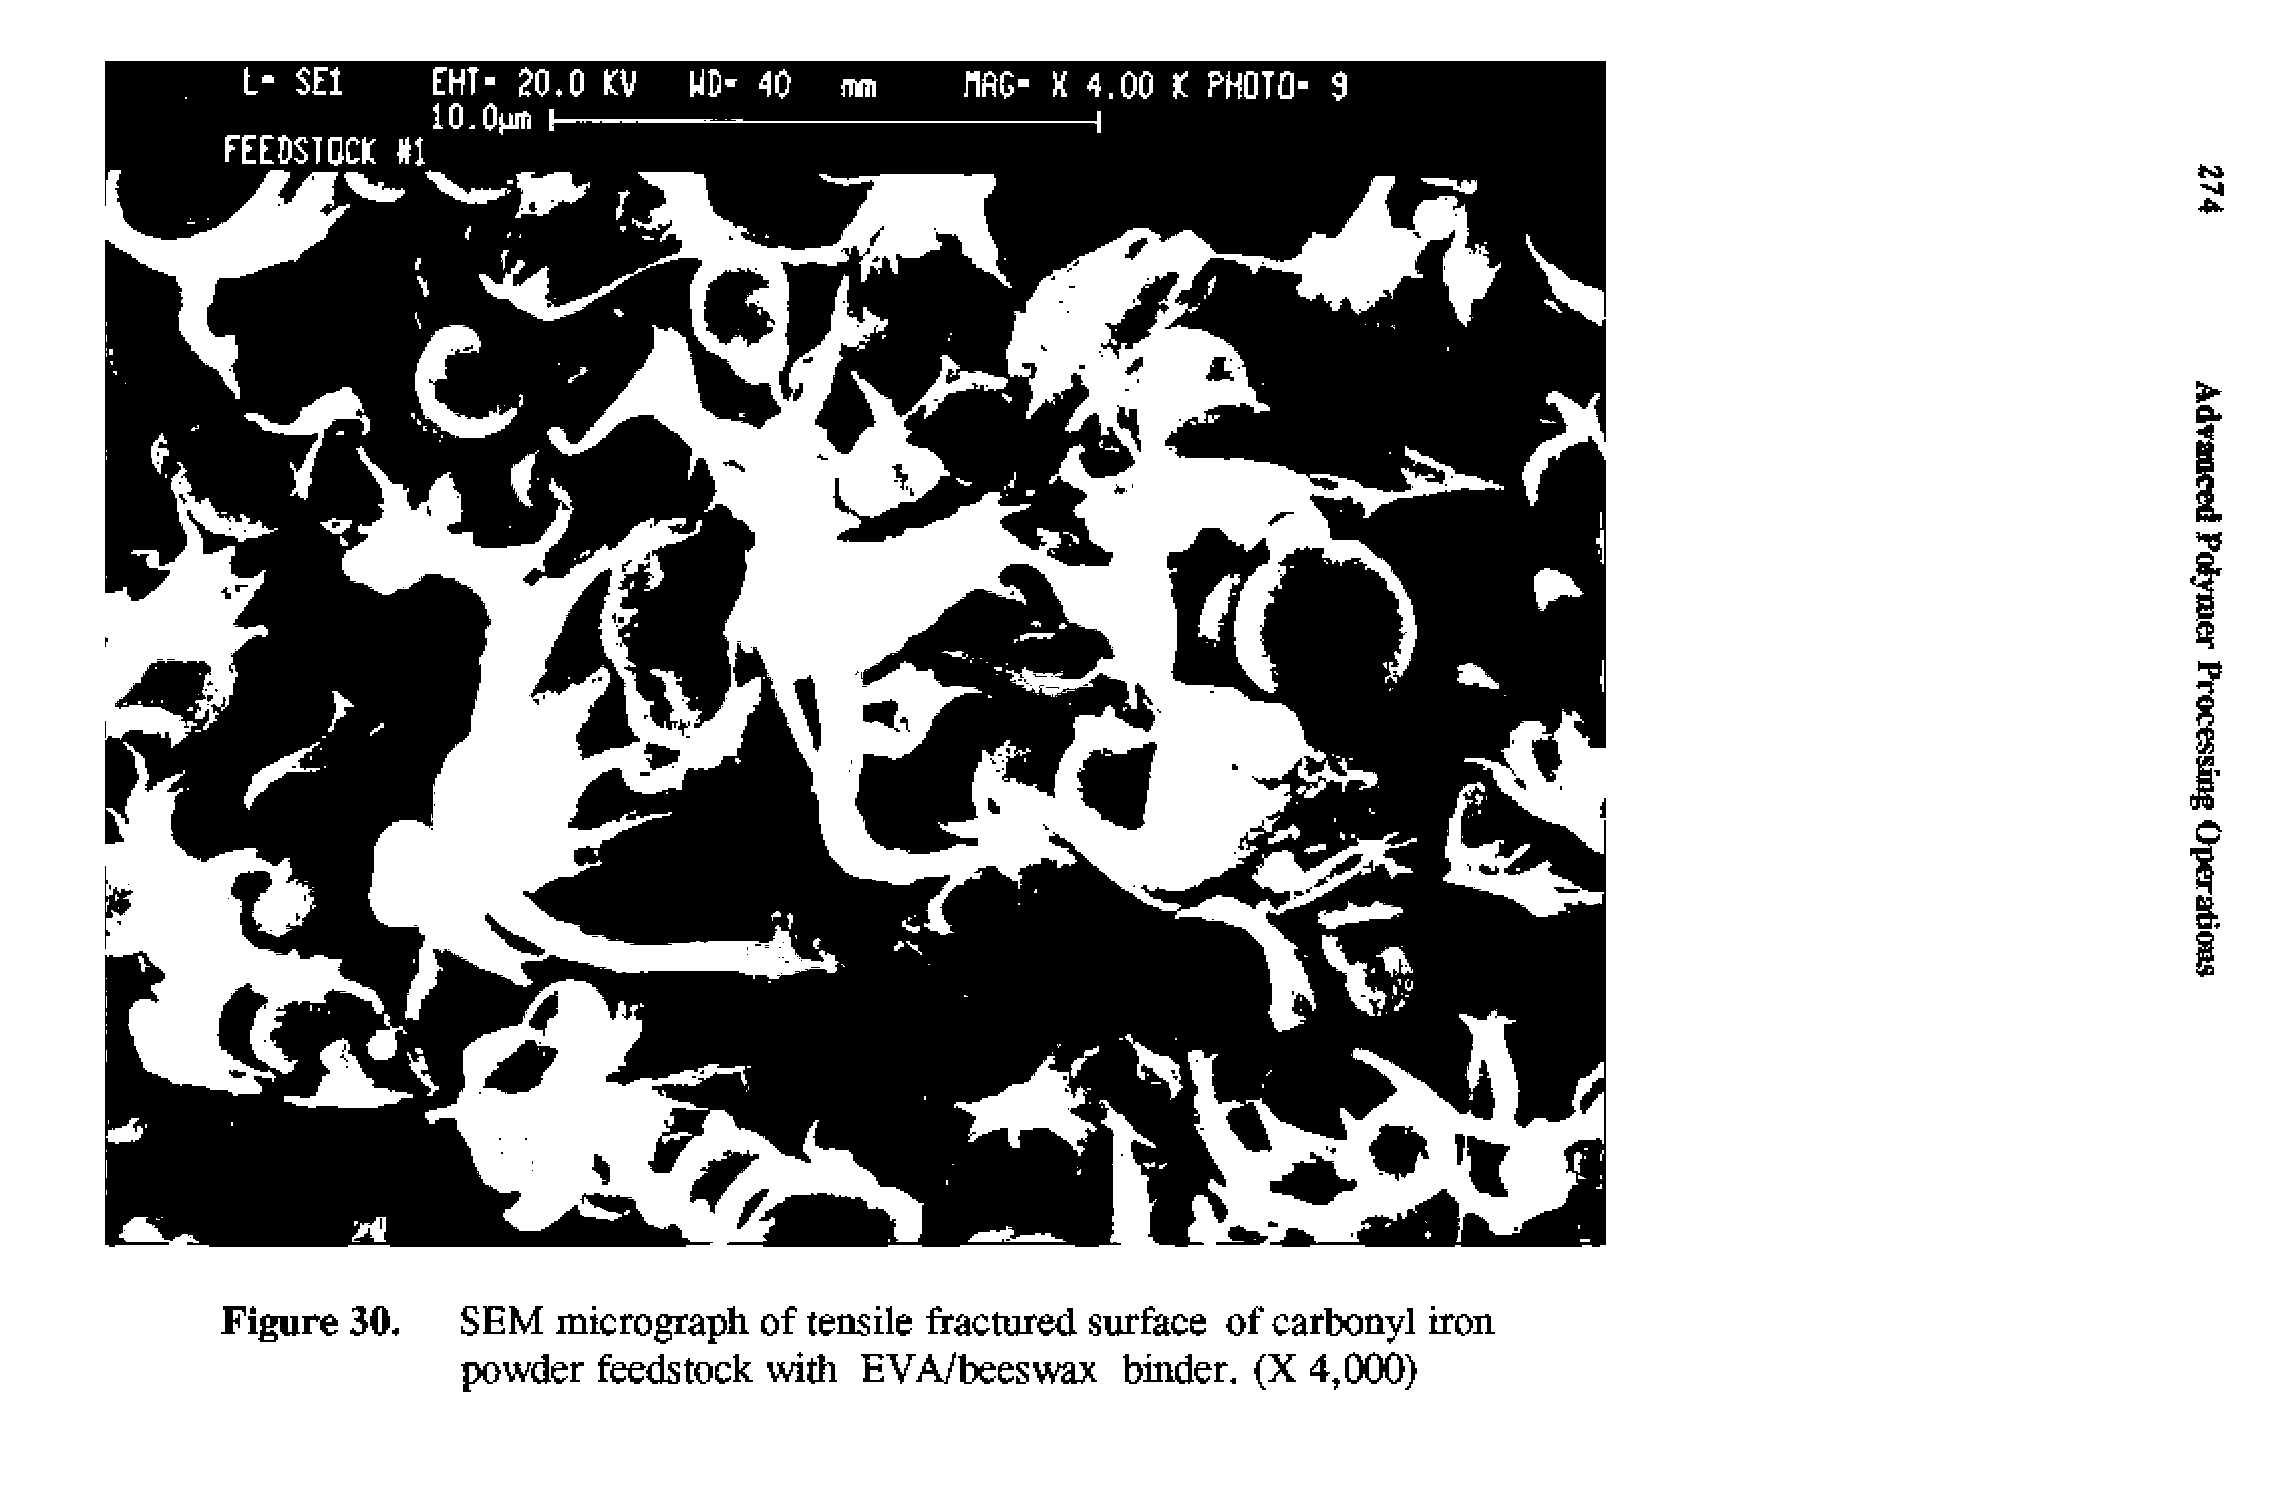 Figure 30. SEM micrograph of tensile fractured surfece of carbonyl iron powder feedstock with EVA/beeswax binder. (X 4,000)...